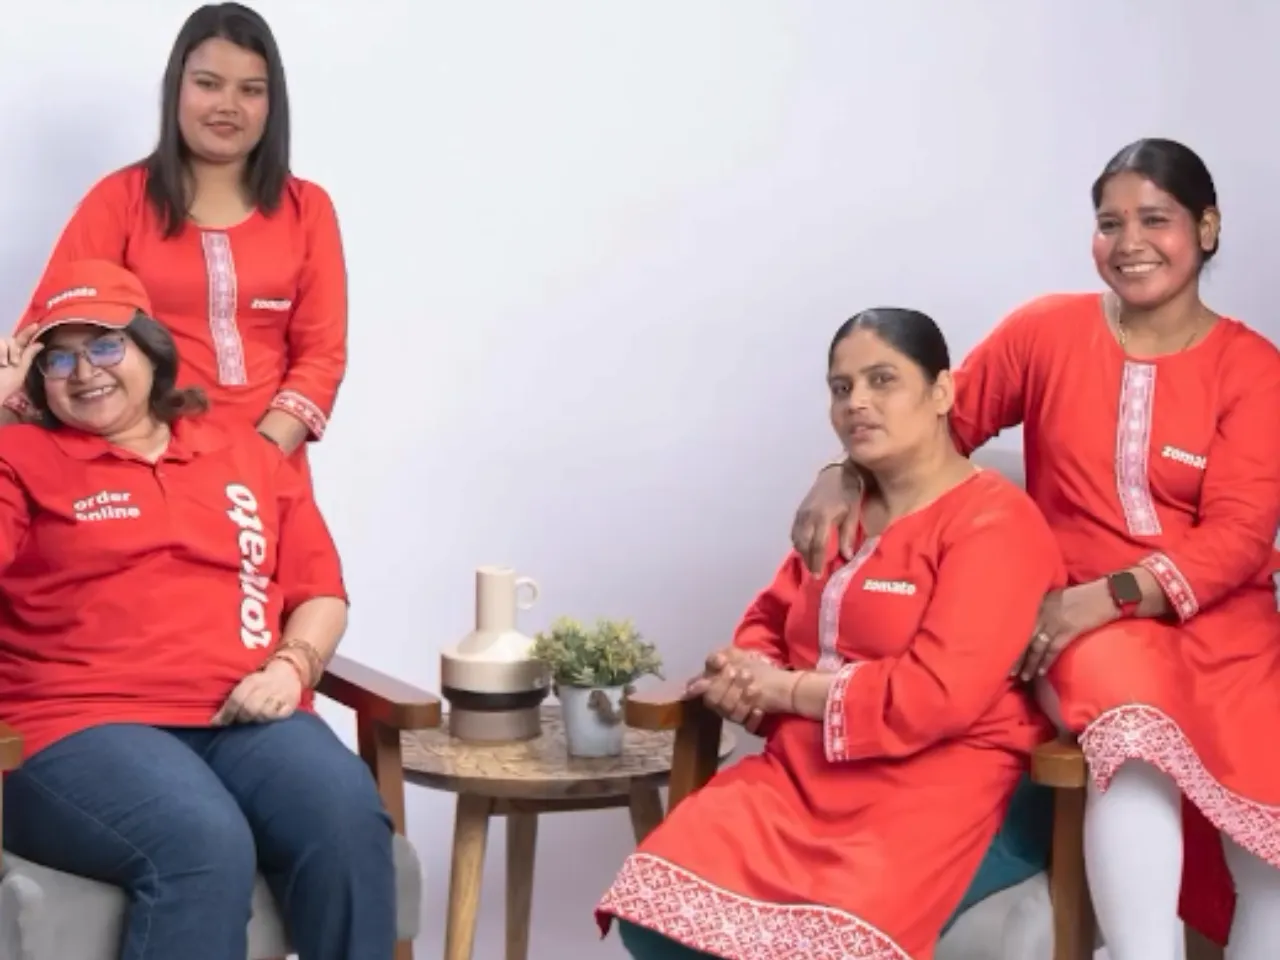 Zomato introduces new dress code for female delivery partners